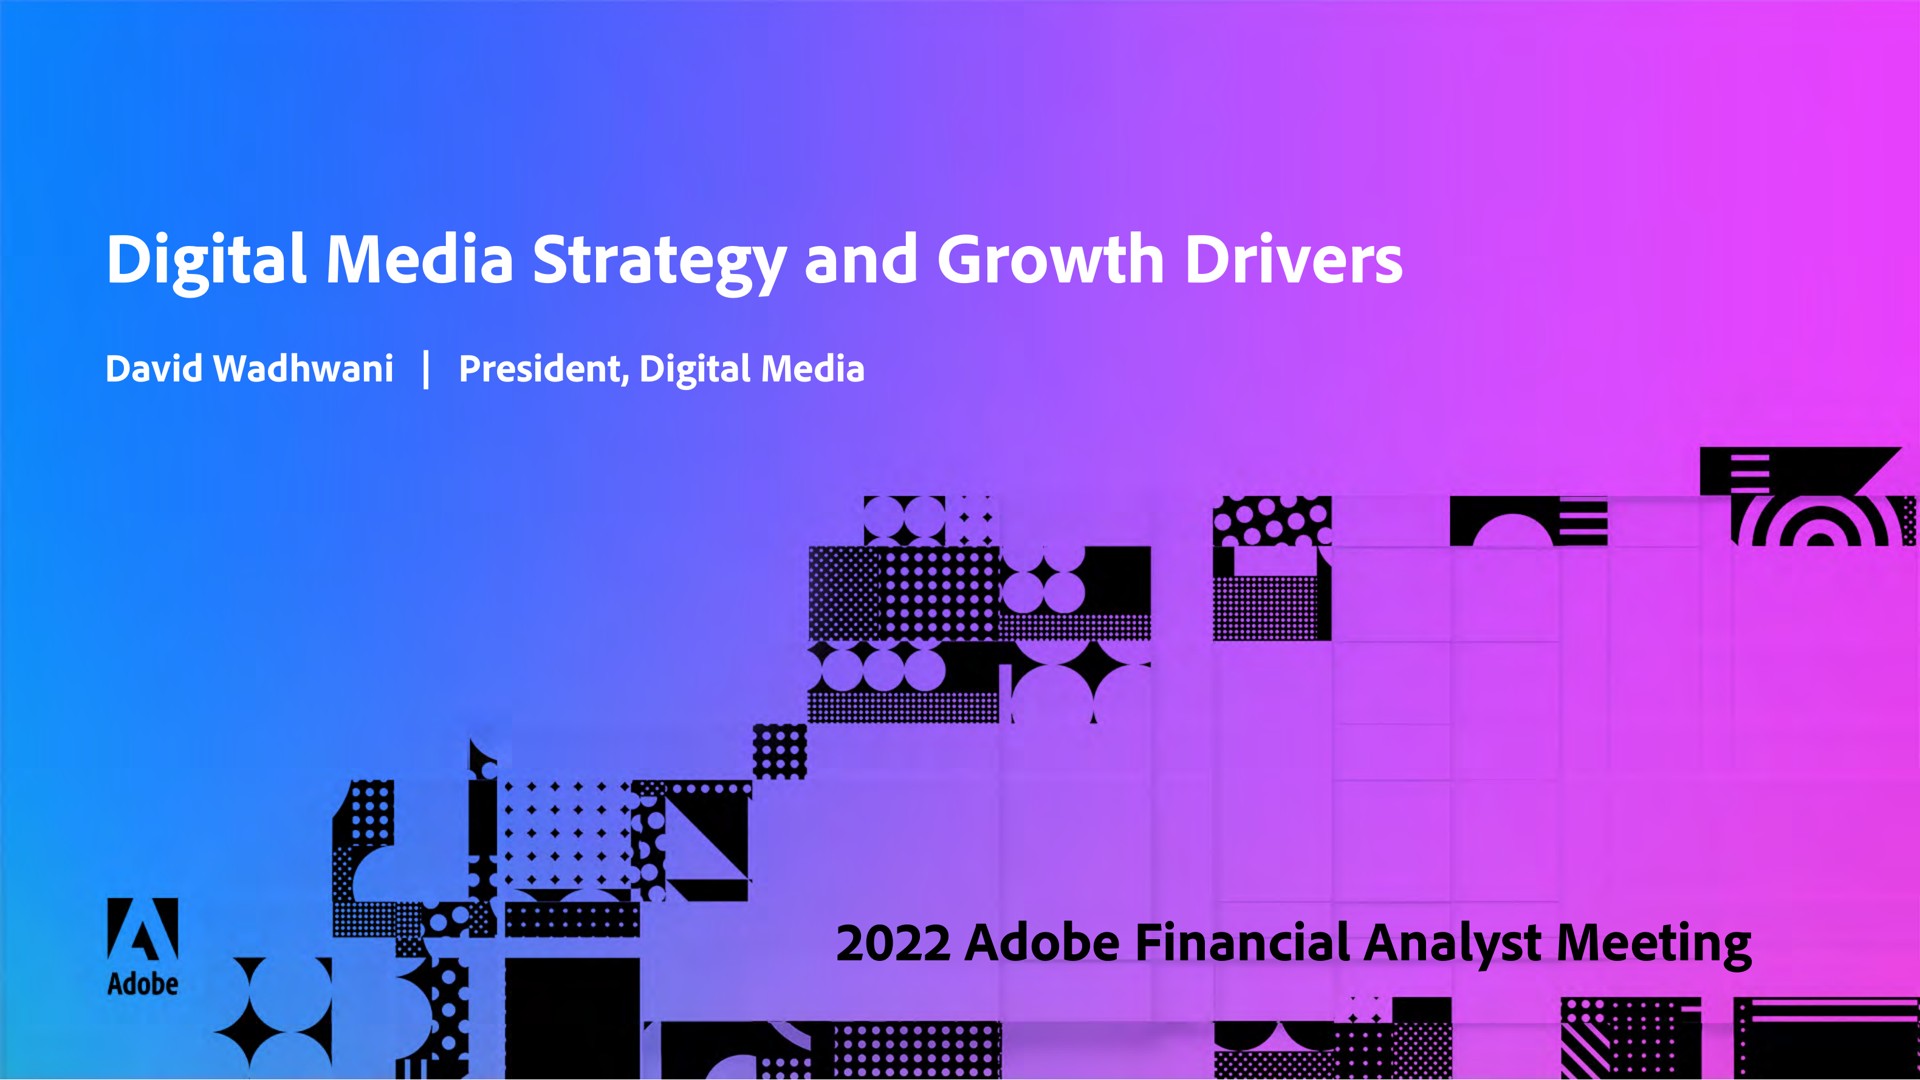 digital media strategy and growth drivers adobe financial analyst meeting | Adobe